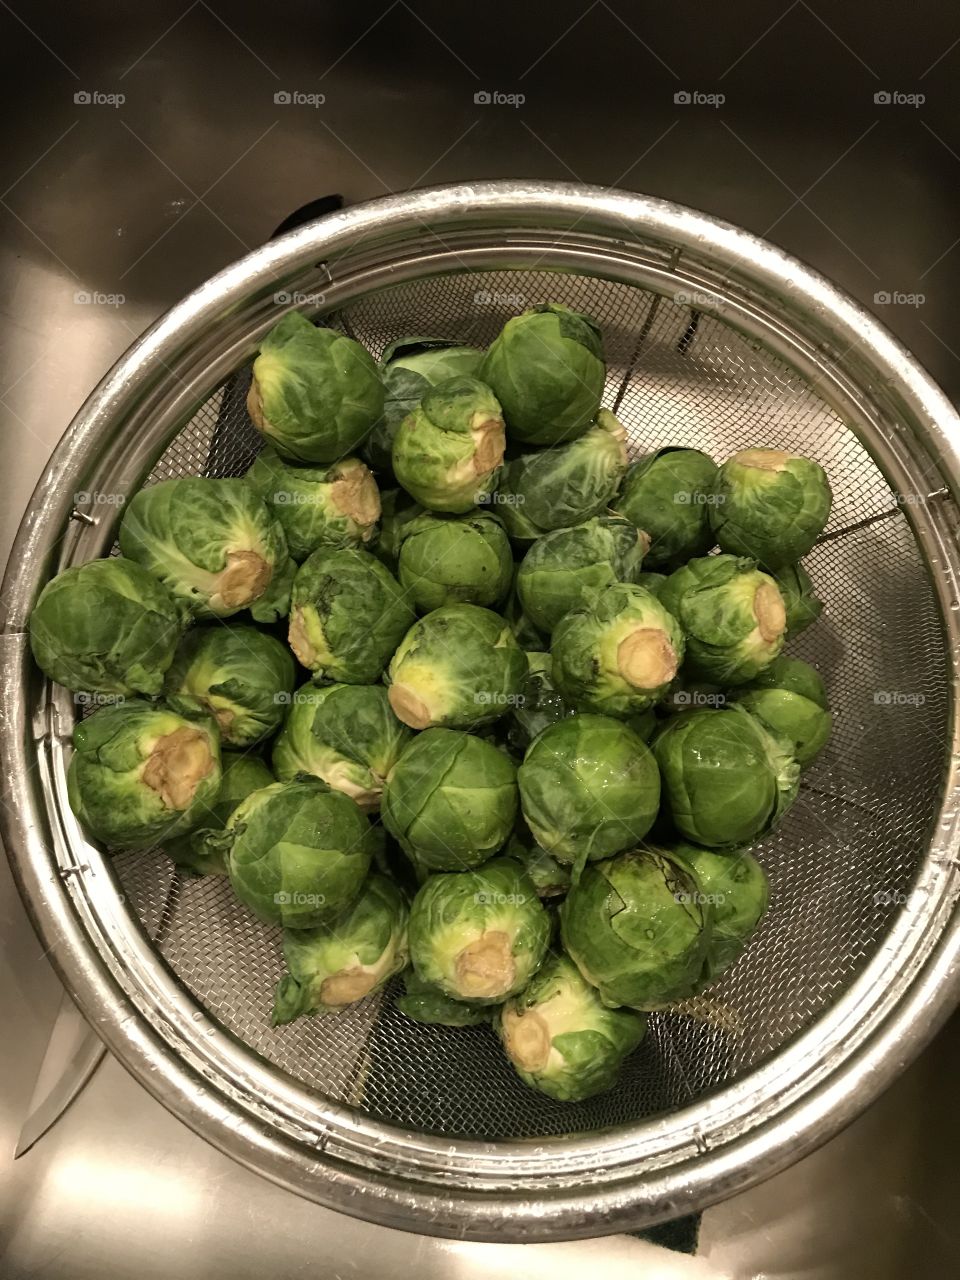 Brussell Sprouts
